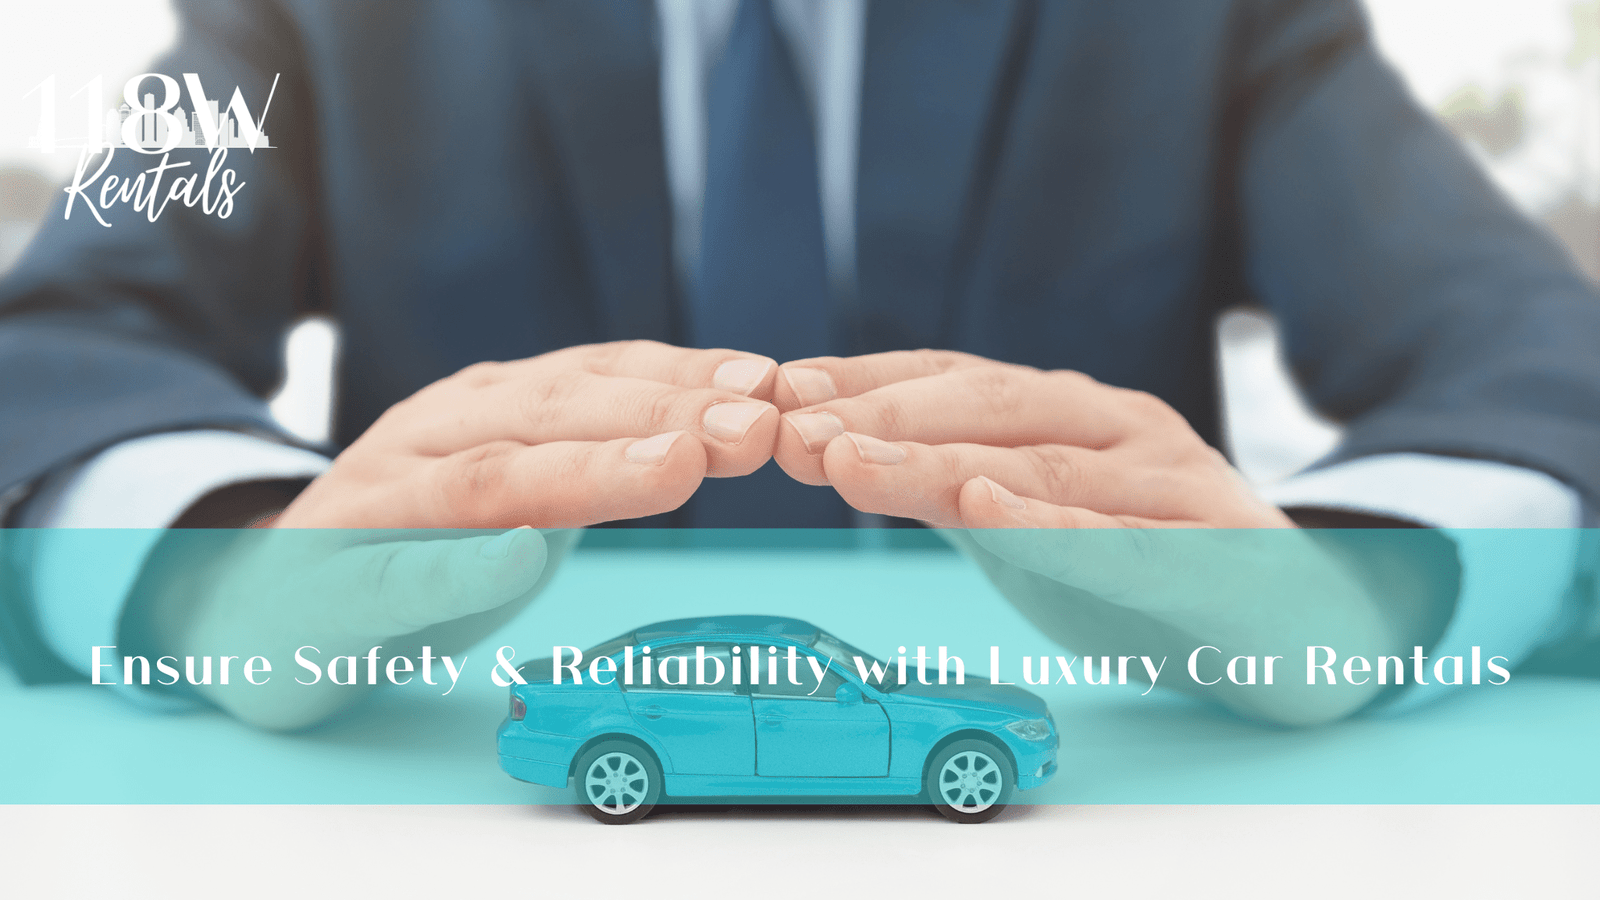 Ensure Safety & Reliability with Luxury Car Rentals | 118 W Rentals